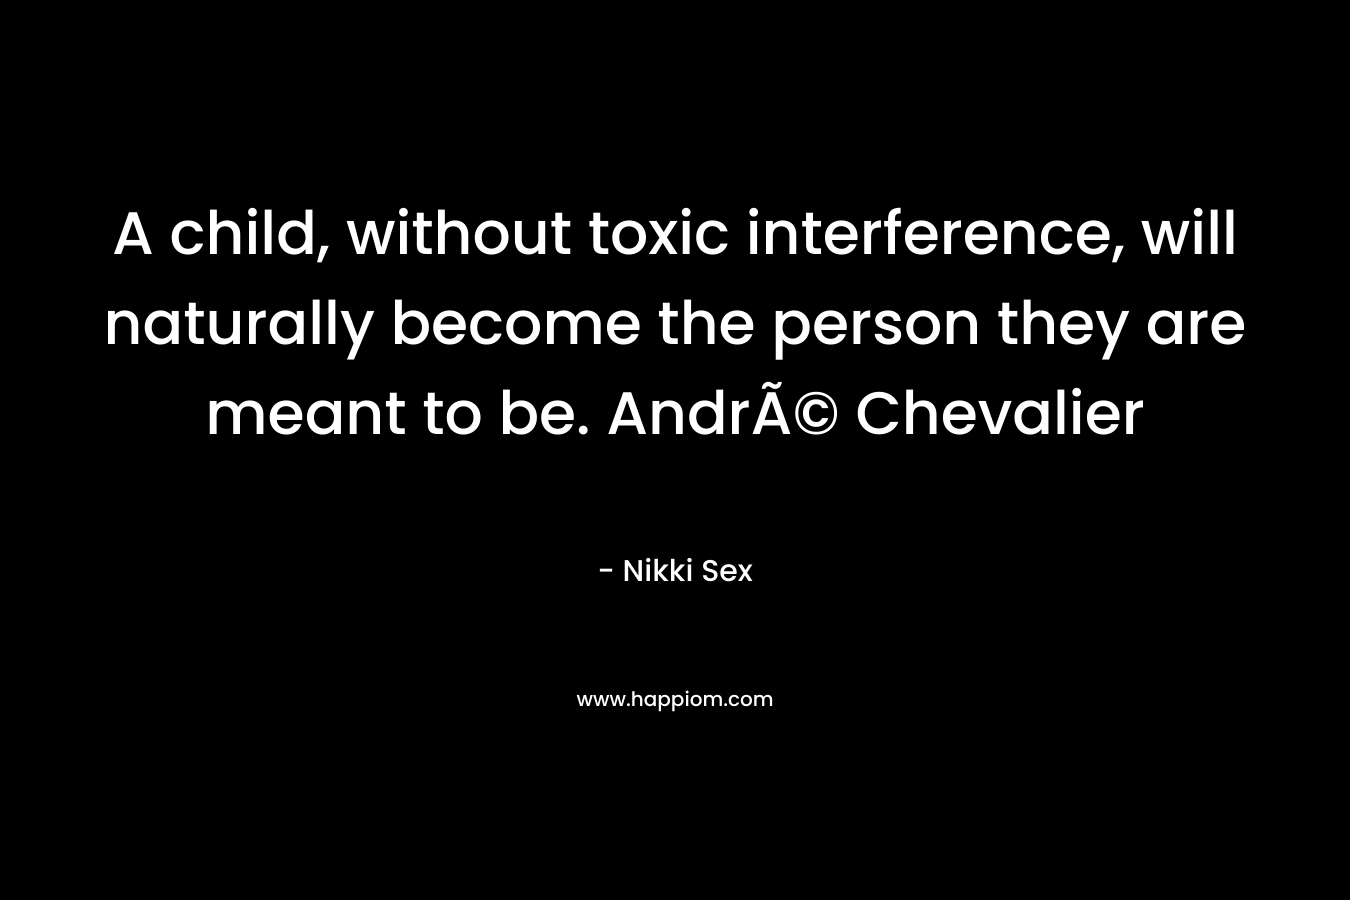 A child, without toxic interference, will naturally become the person they are meant to be. AndrÃ© Chevalier – Nikki Sex